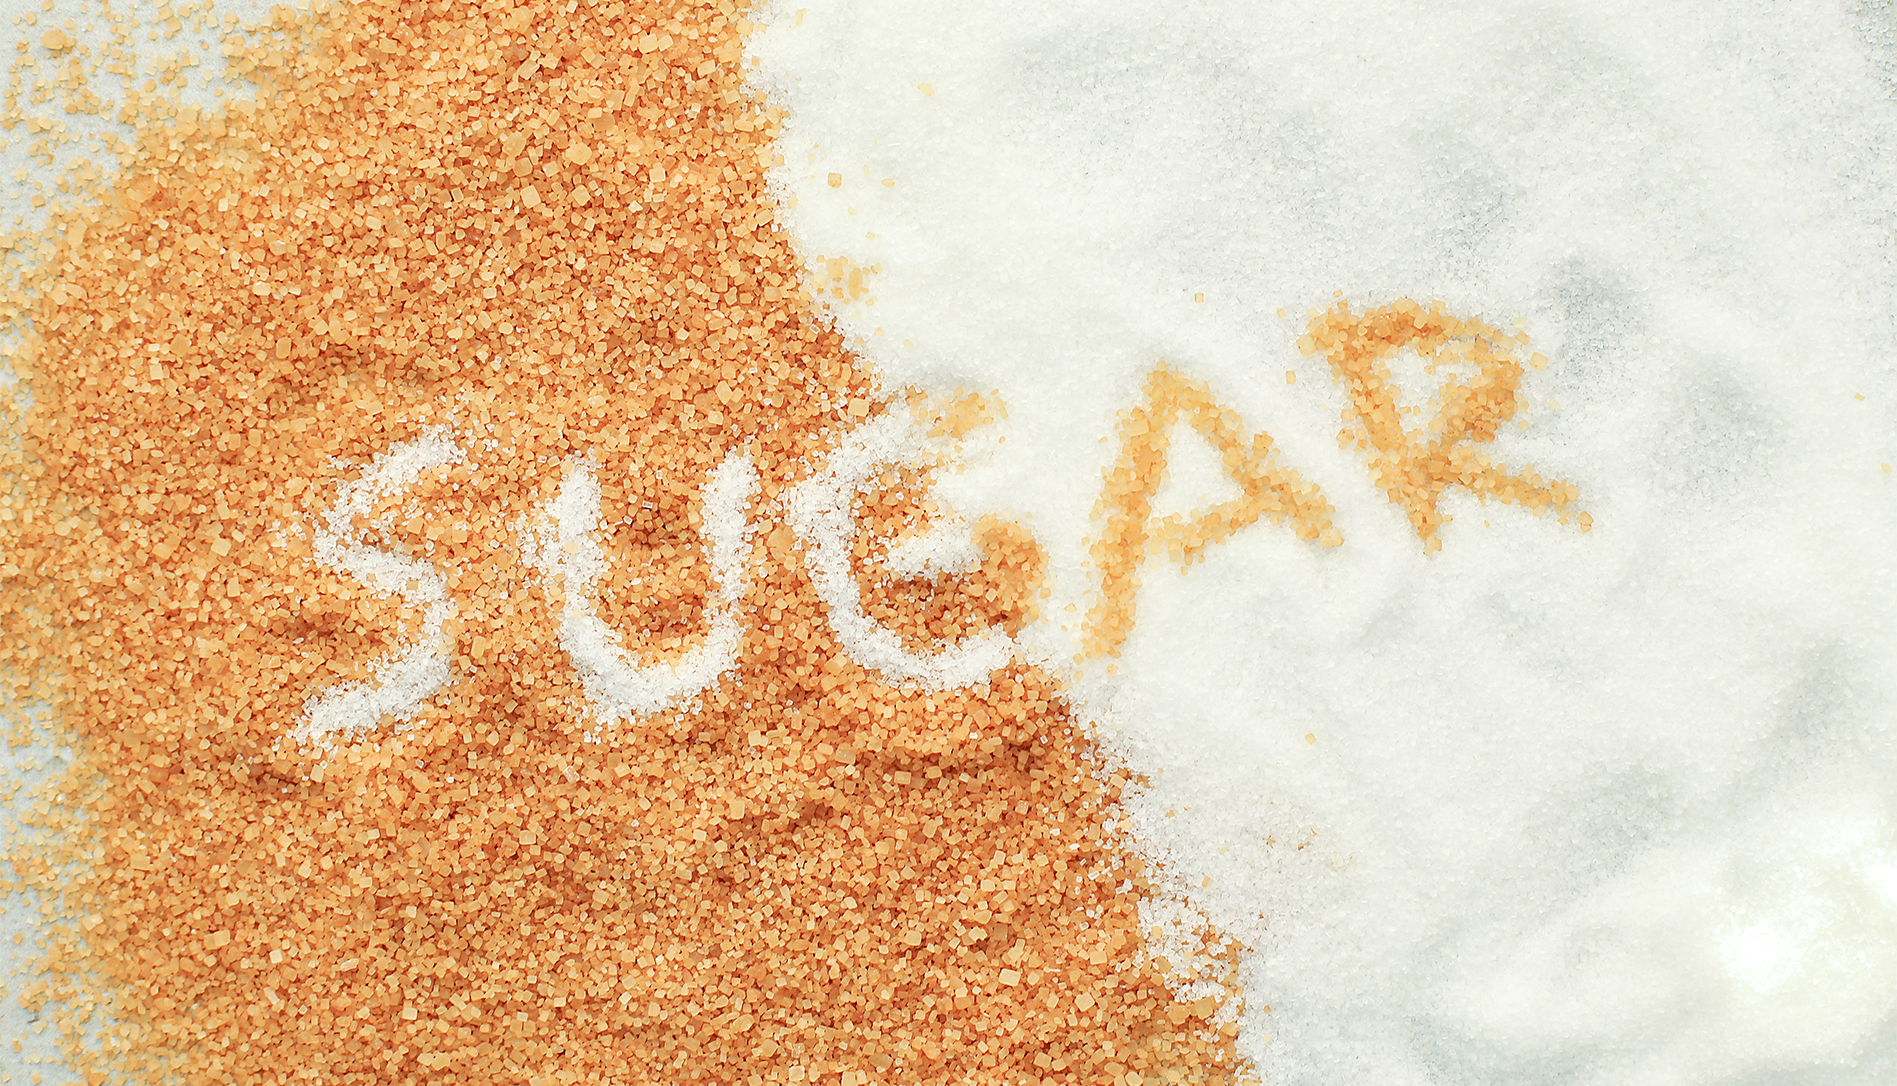 What is the difference between Natural Sugar and Refined Sugar?